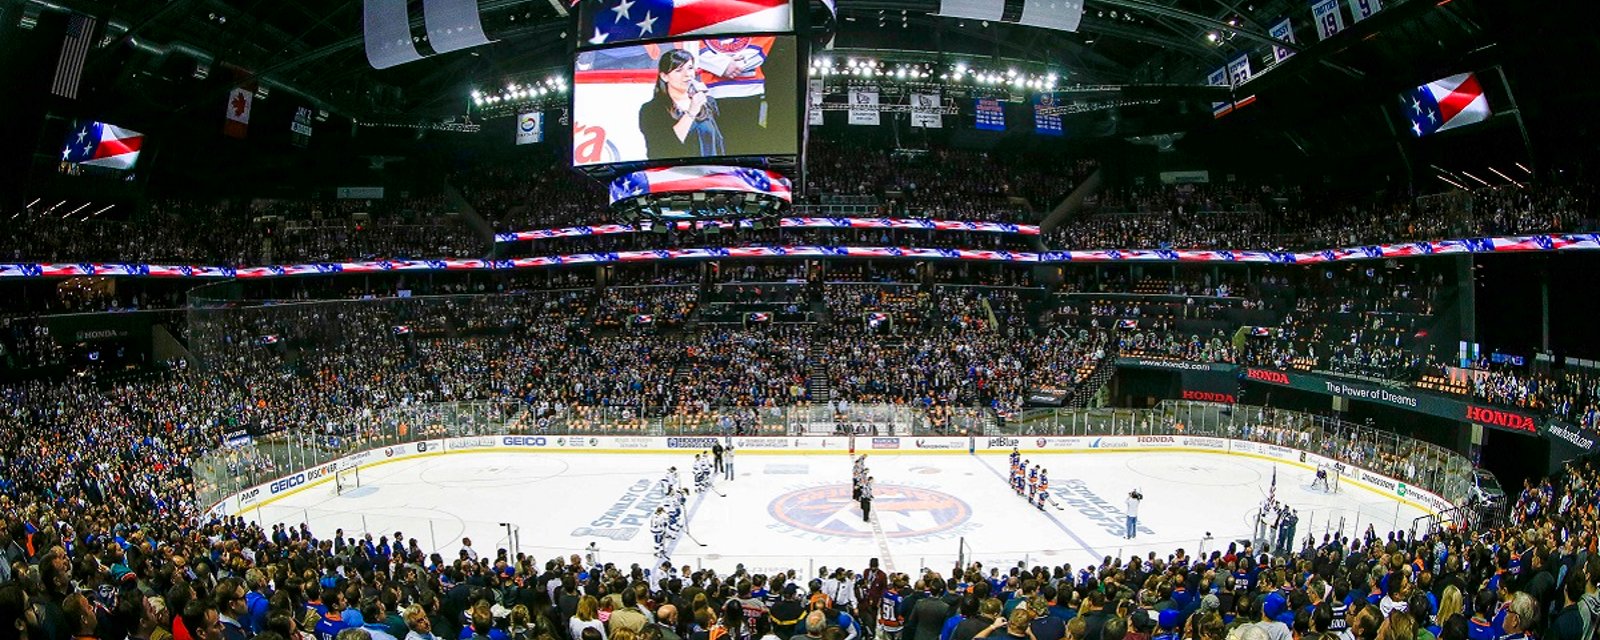 Report: NHL to investigate “inexcusable and potentially dangerous” arena conditions.